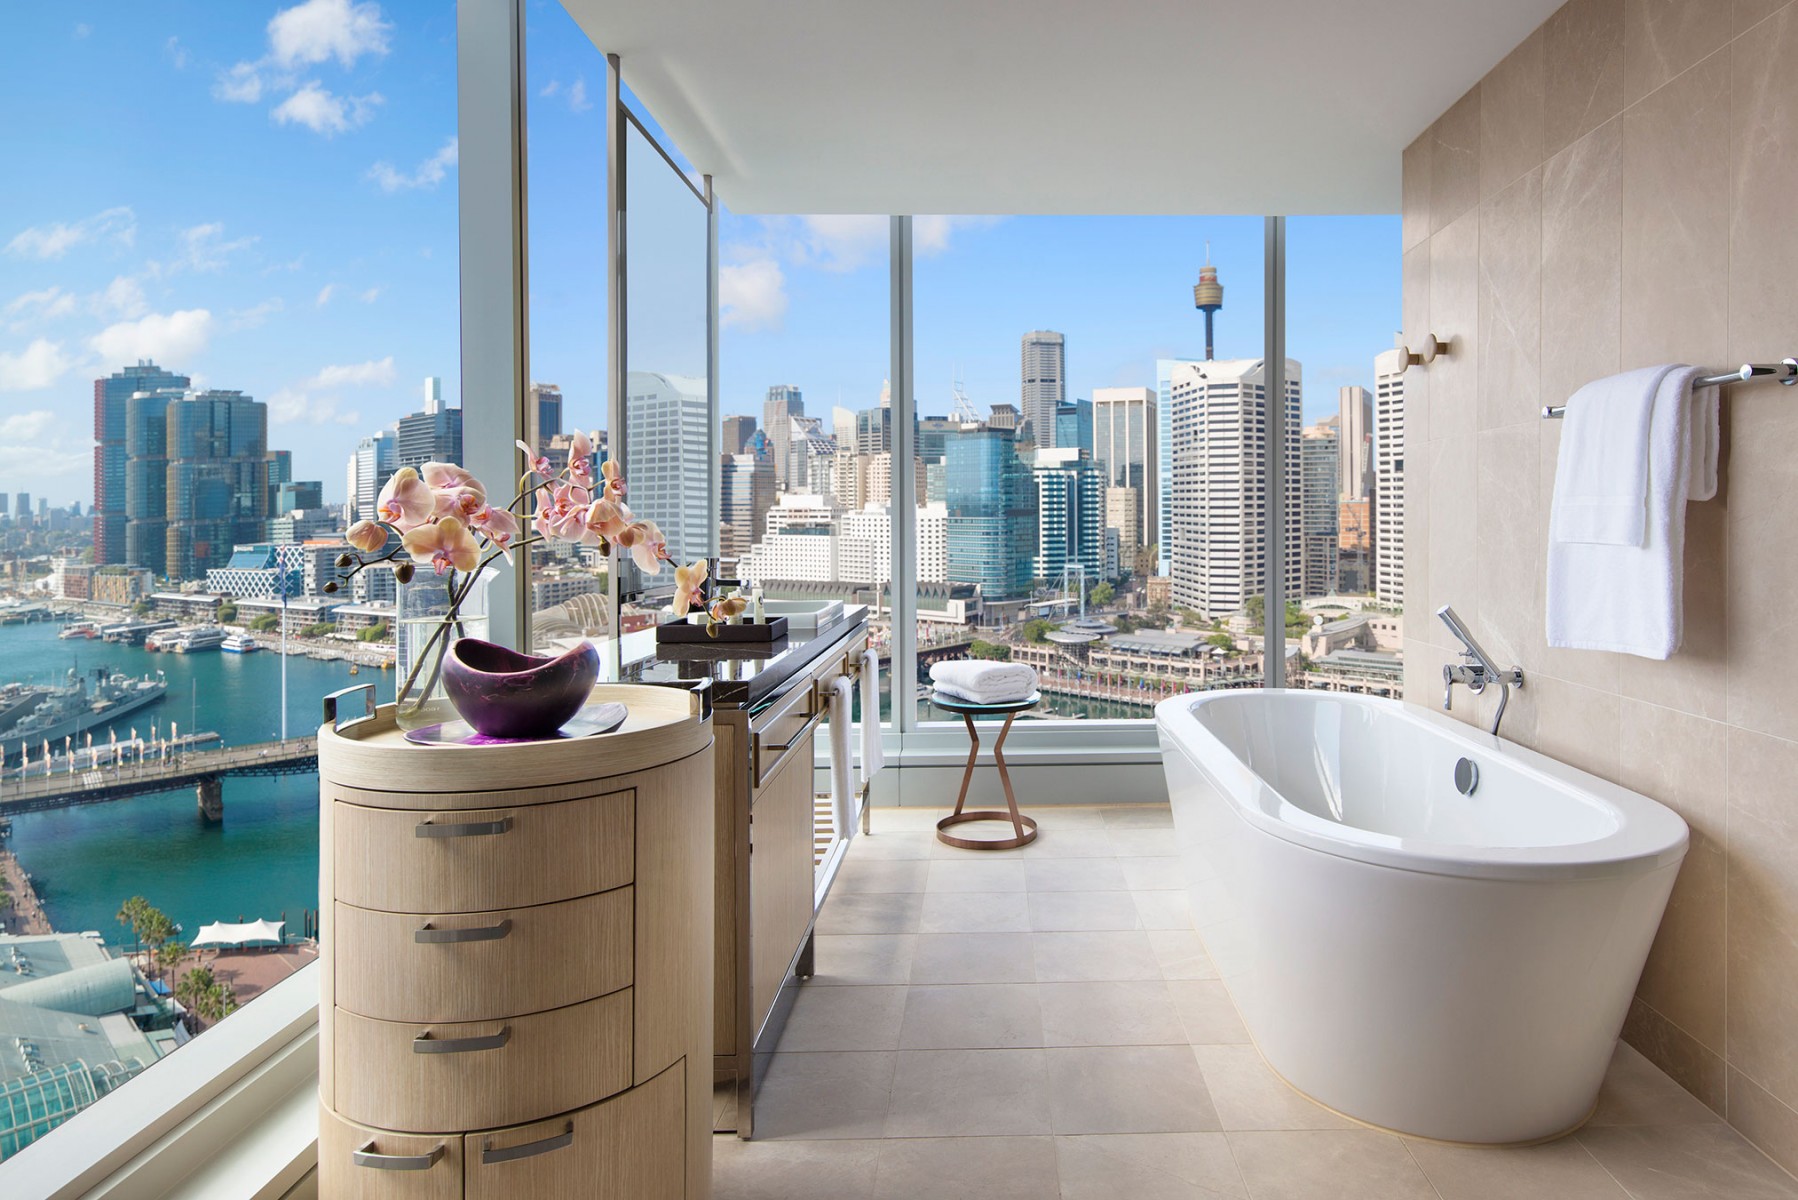 Bathroom of a Luxury Corner Room at the Sofitel Sydney Darling Harbour in Australia. Click to enlarge.